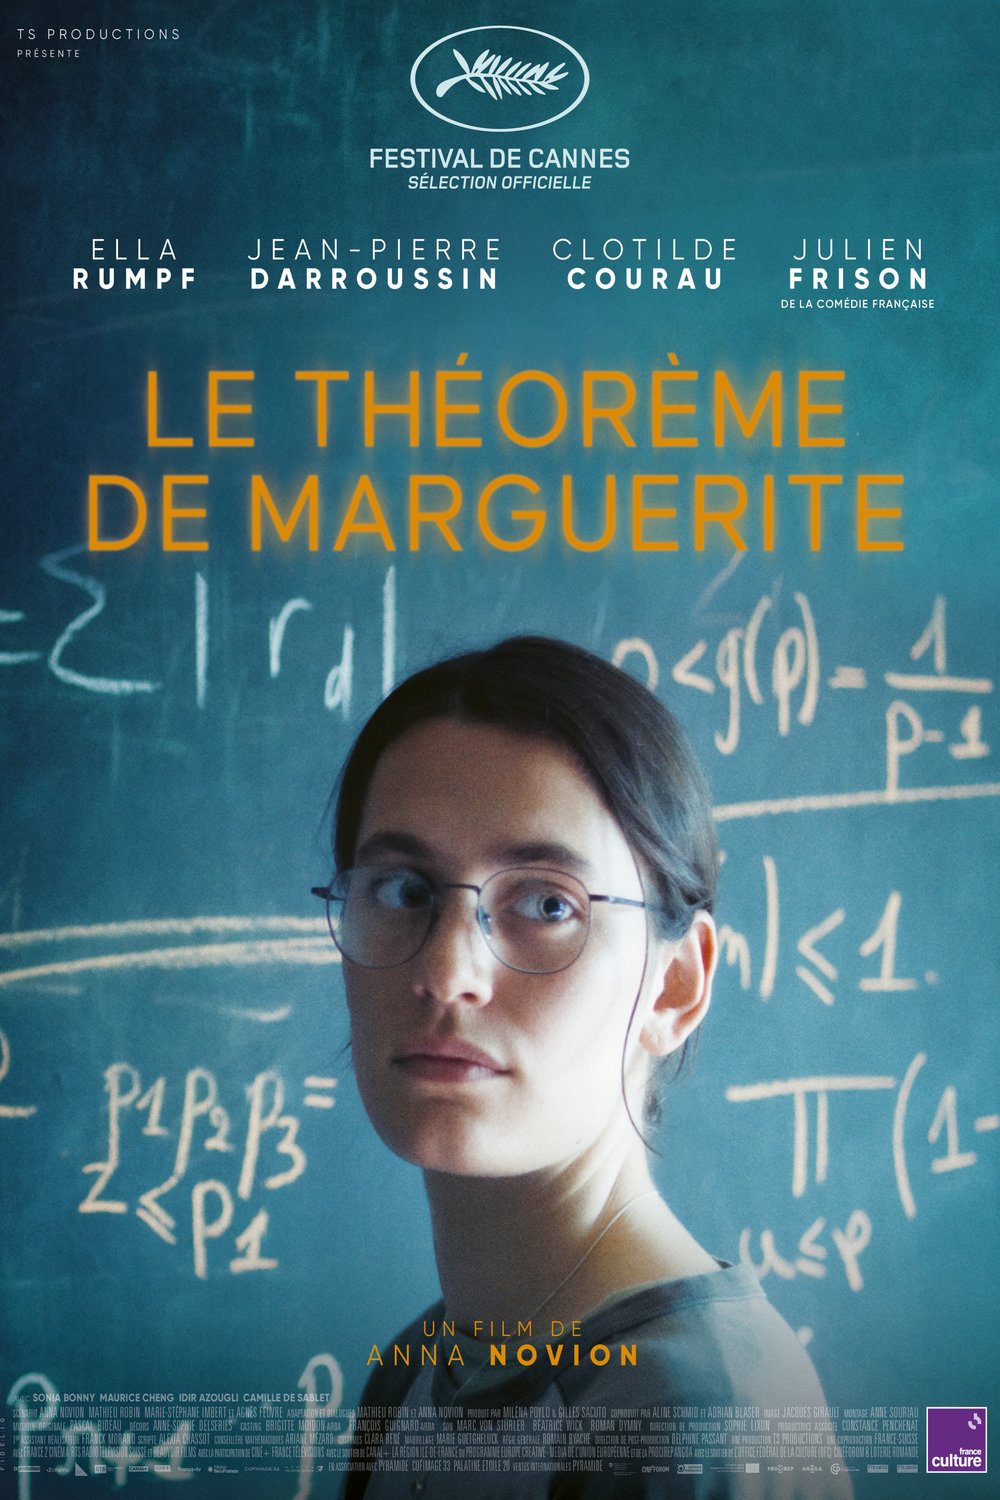 Poster of the movie Marguerite's Theorem